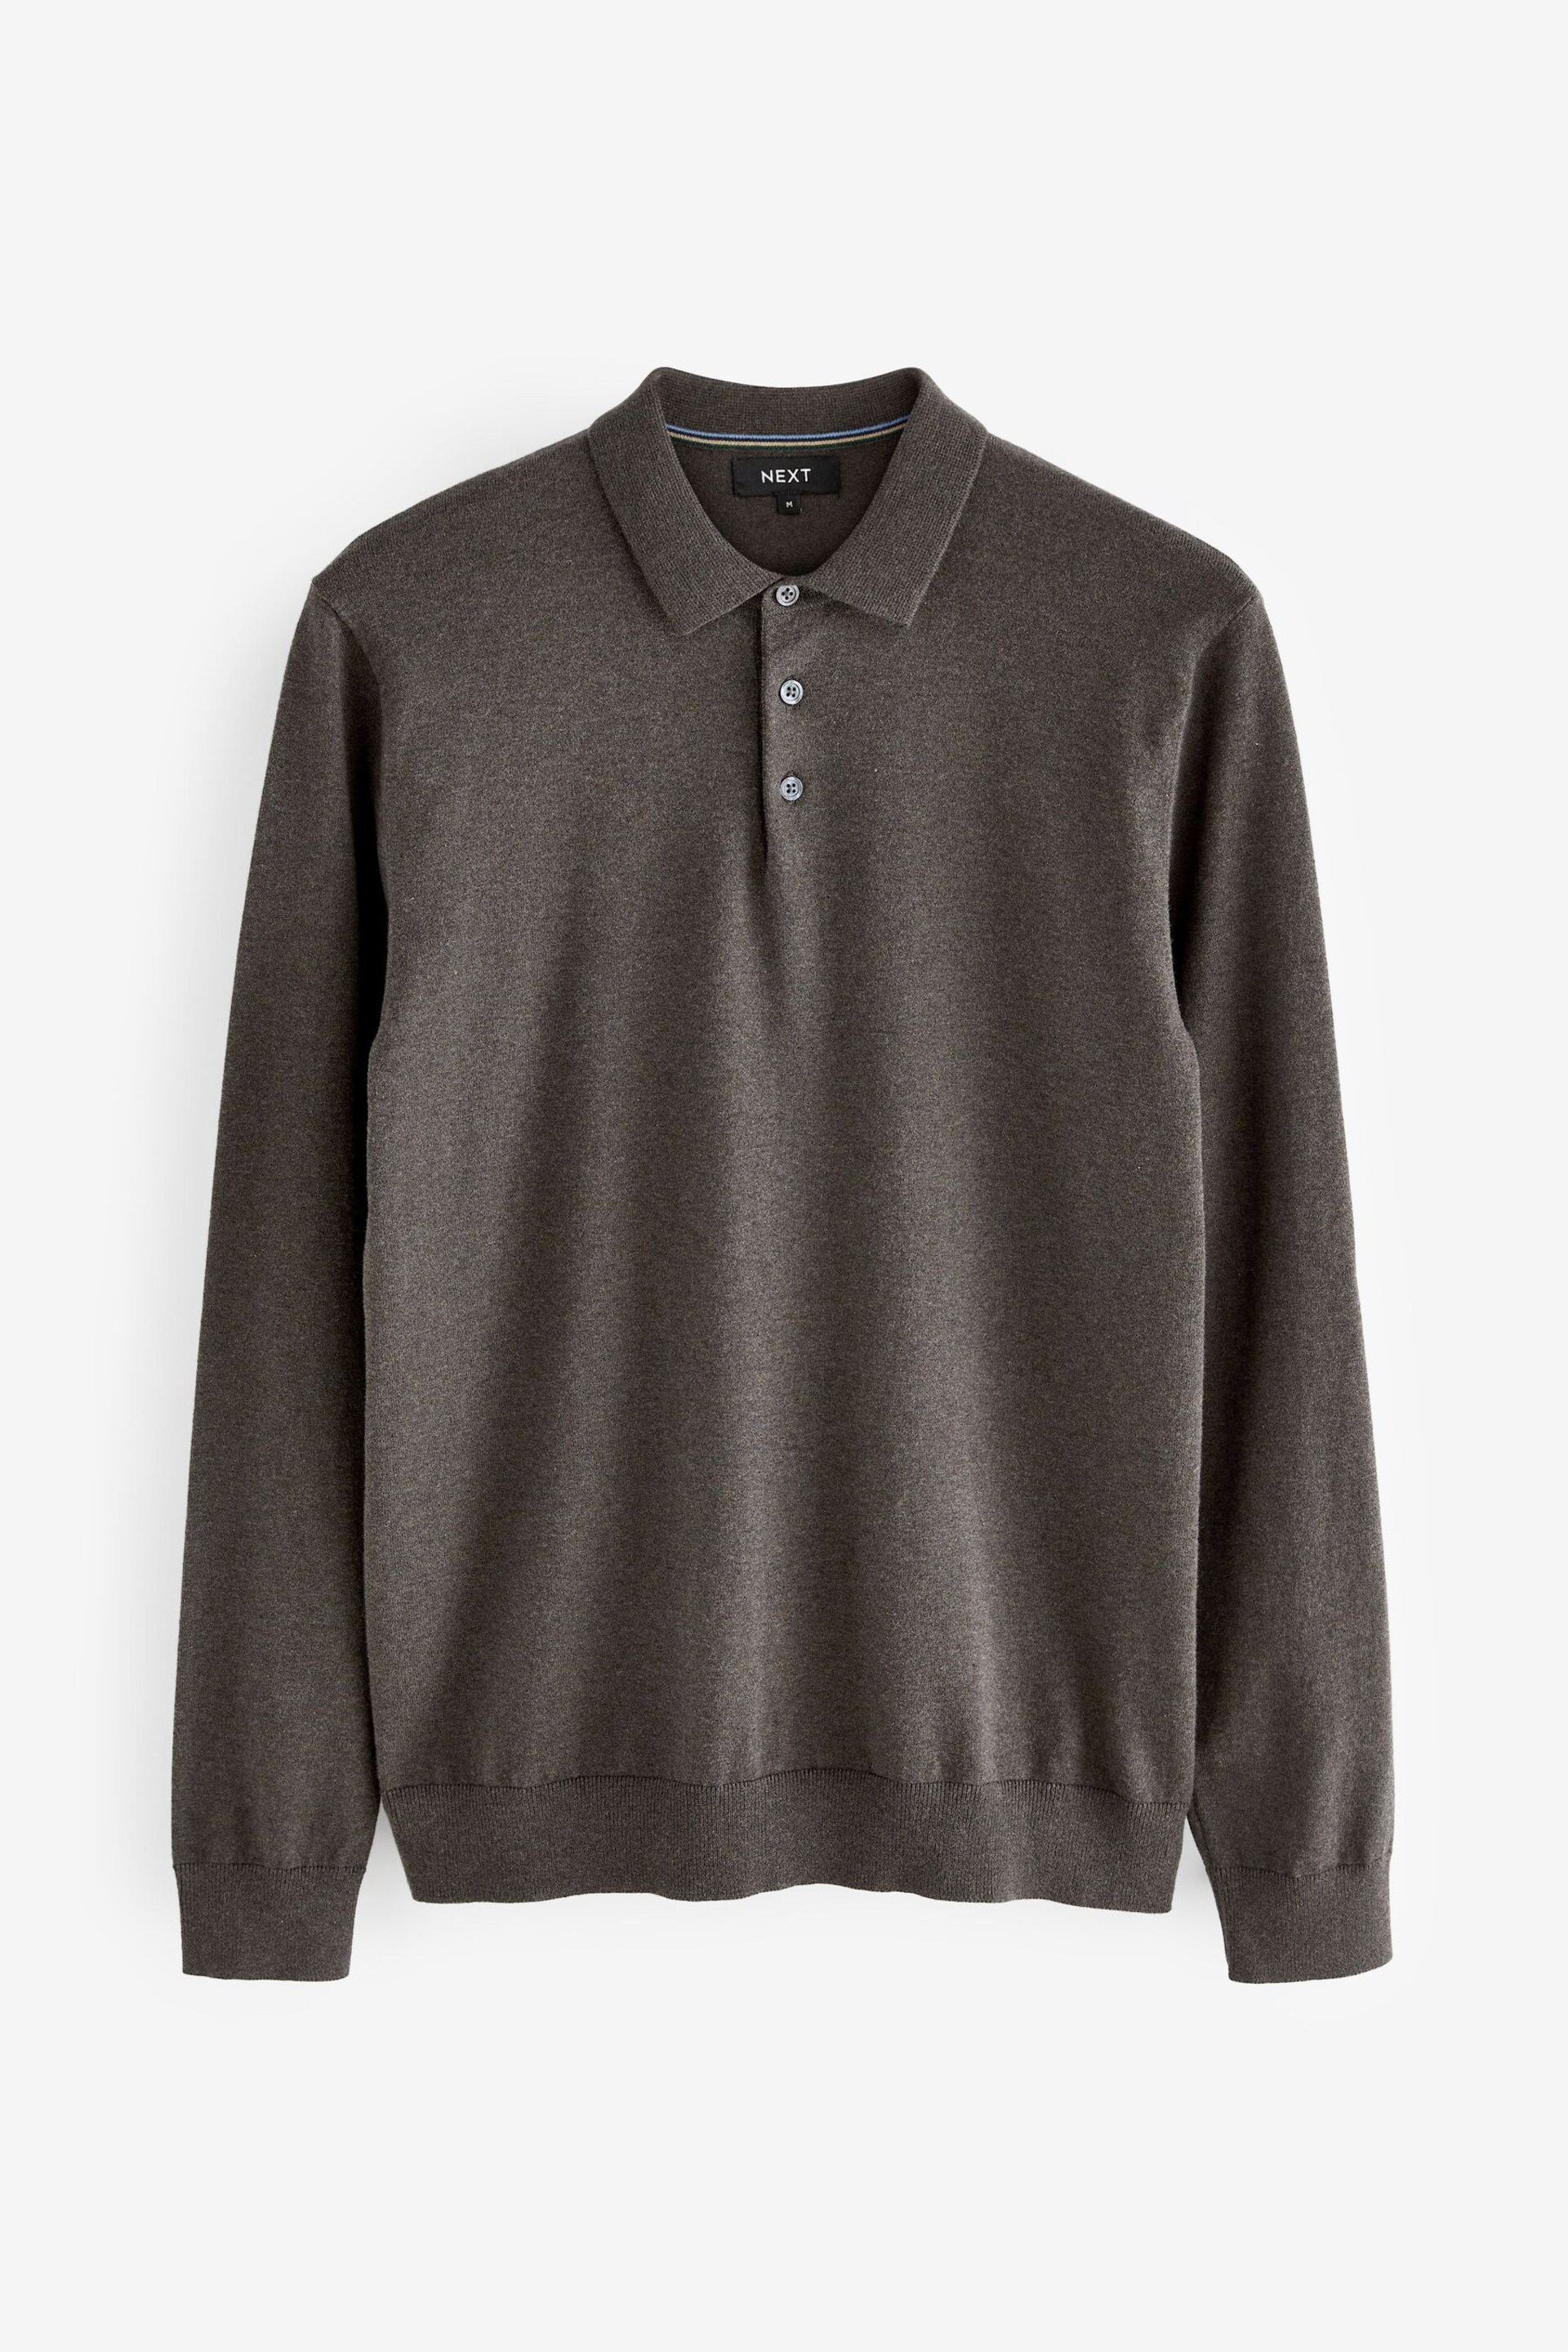 Brown/Grey Regular Knitted Long Sleeve Polo Shirt - Image 5 of 7